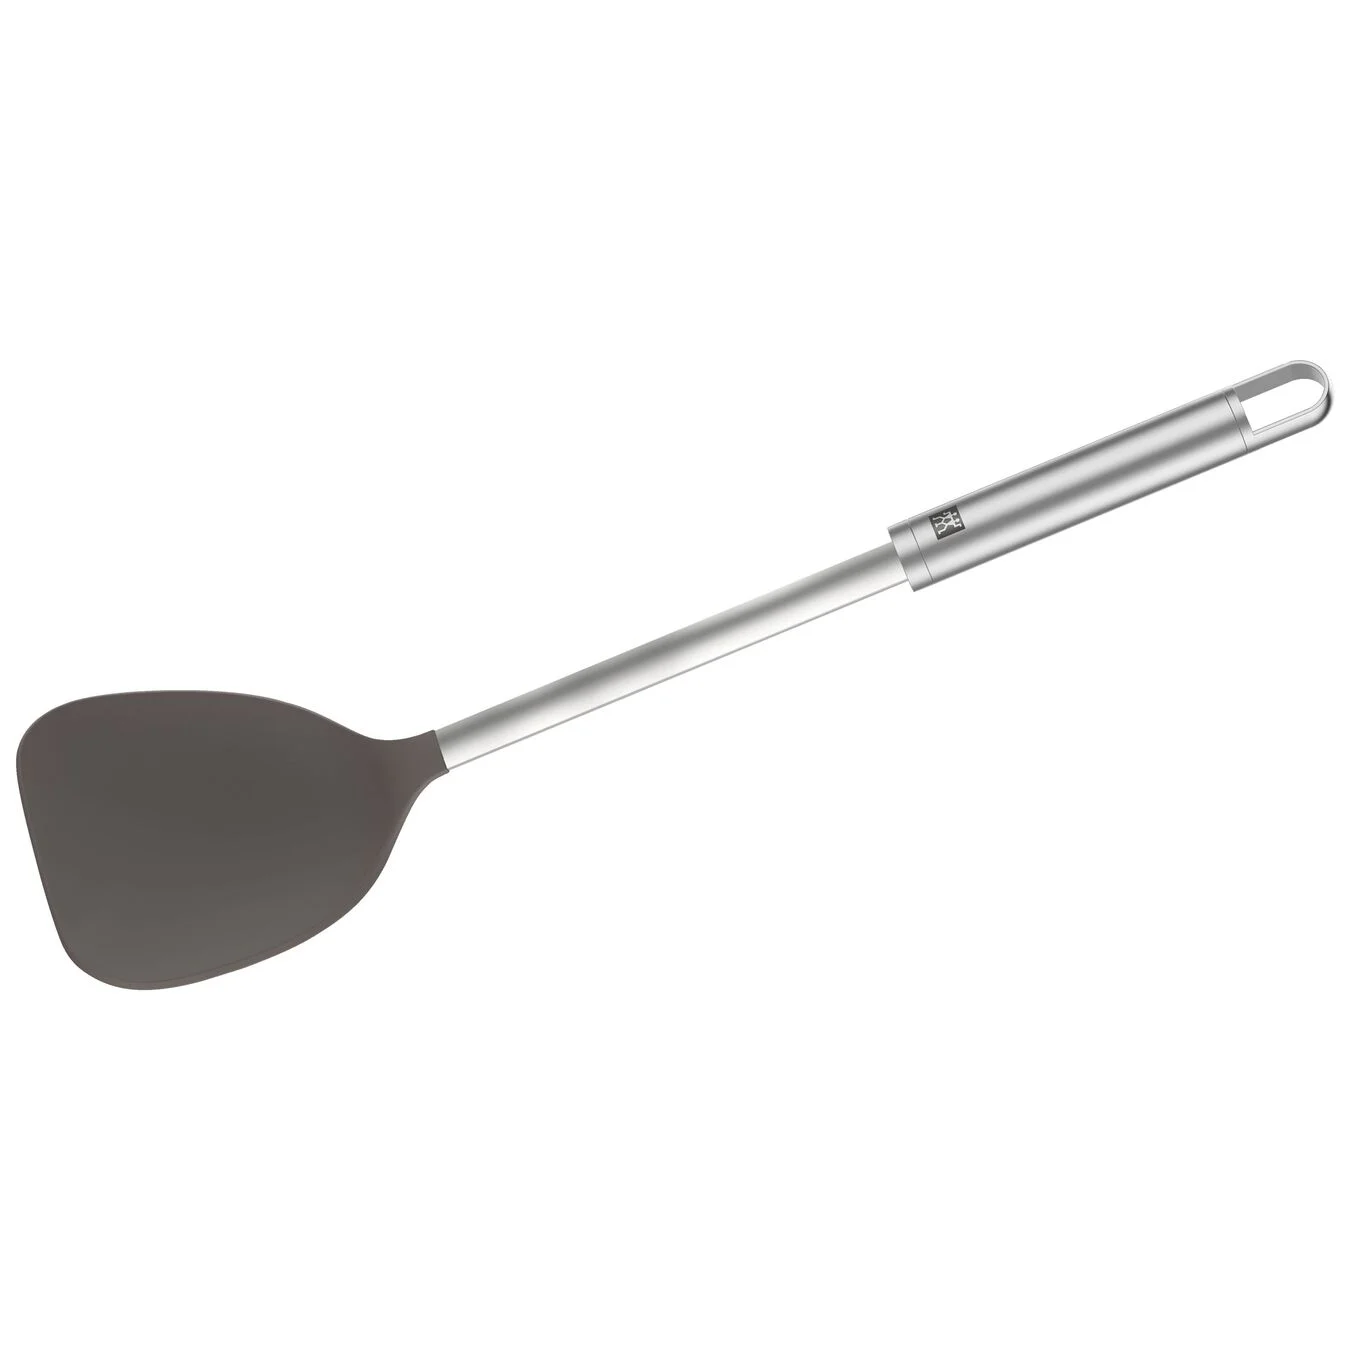 ZWILLING - Xẻng đầu silicon ZWILLING Pro - 37cm